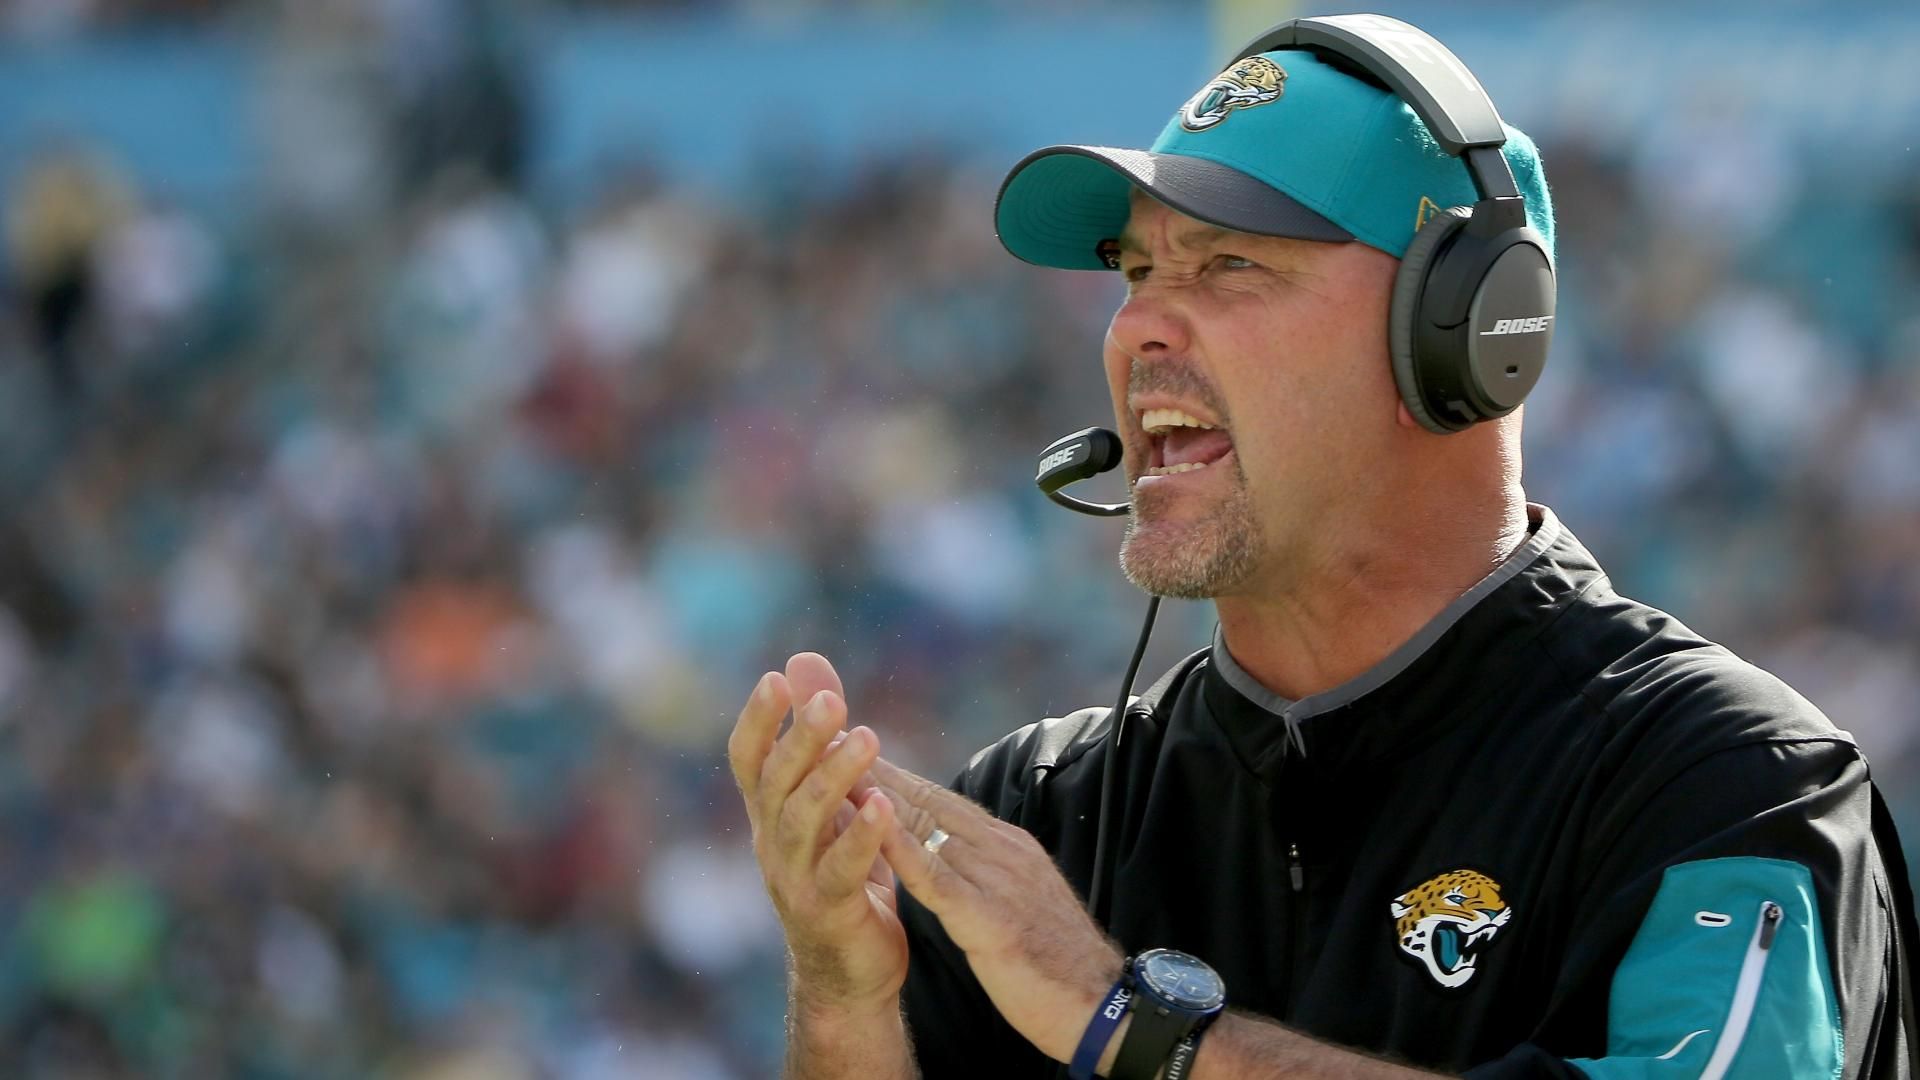 Jaguars owner Shad Khan shows patience with Gus Bradley move